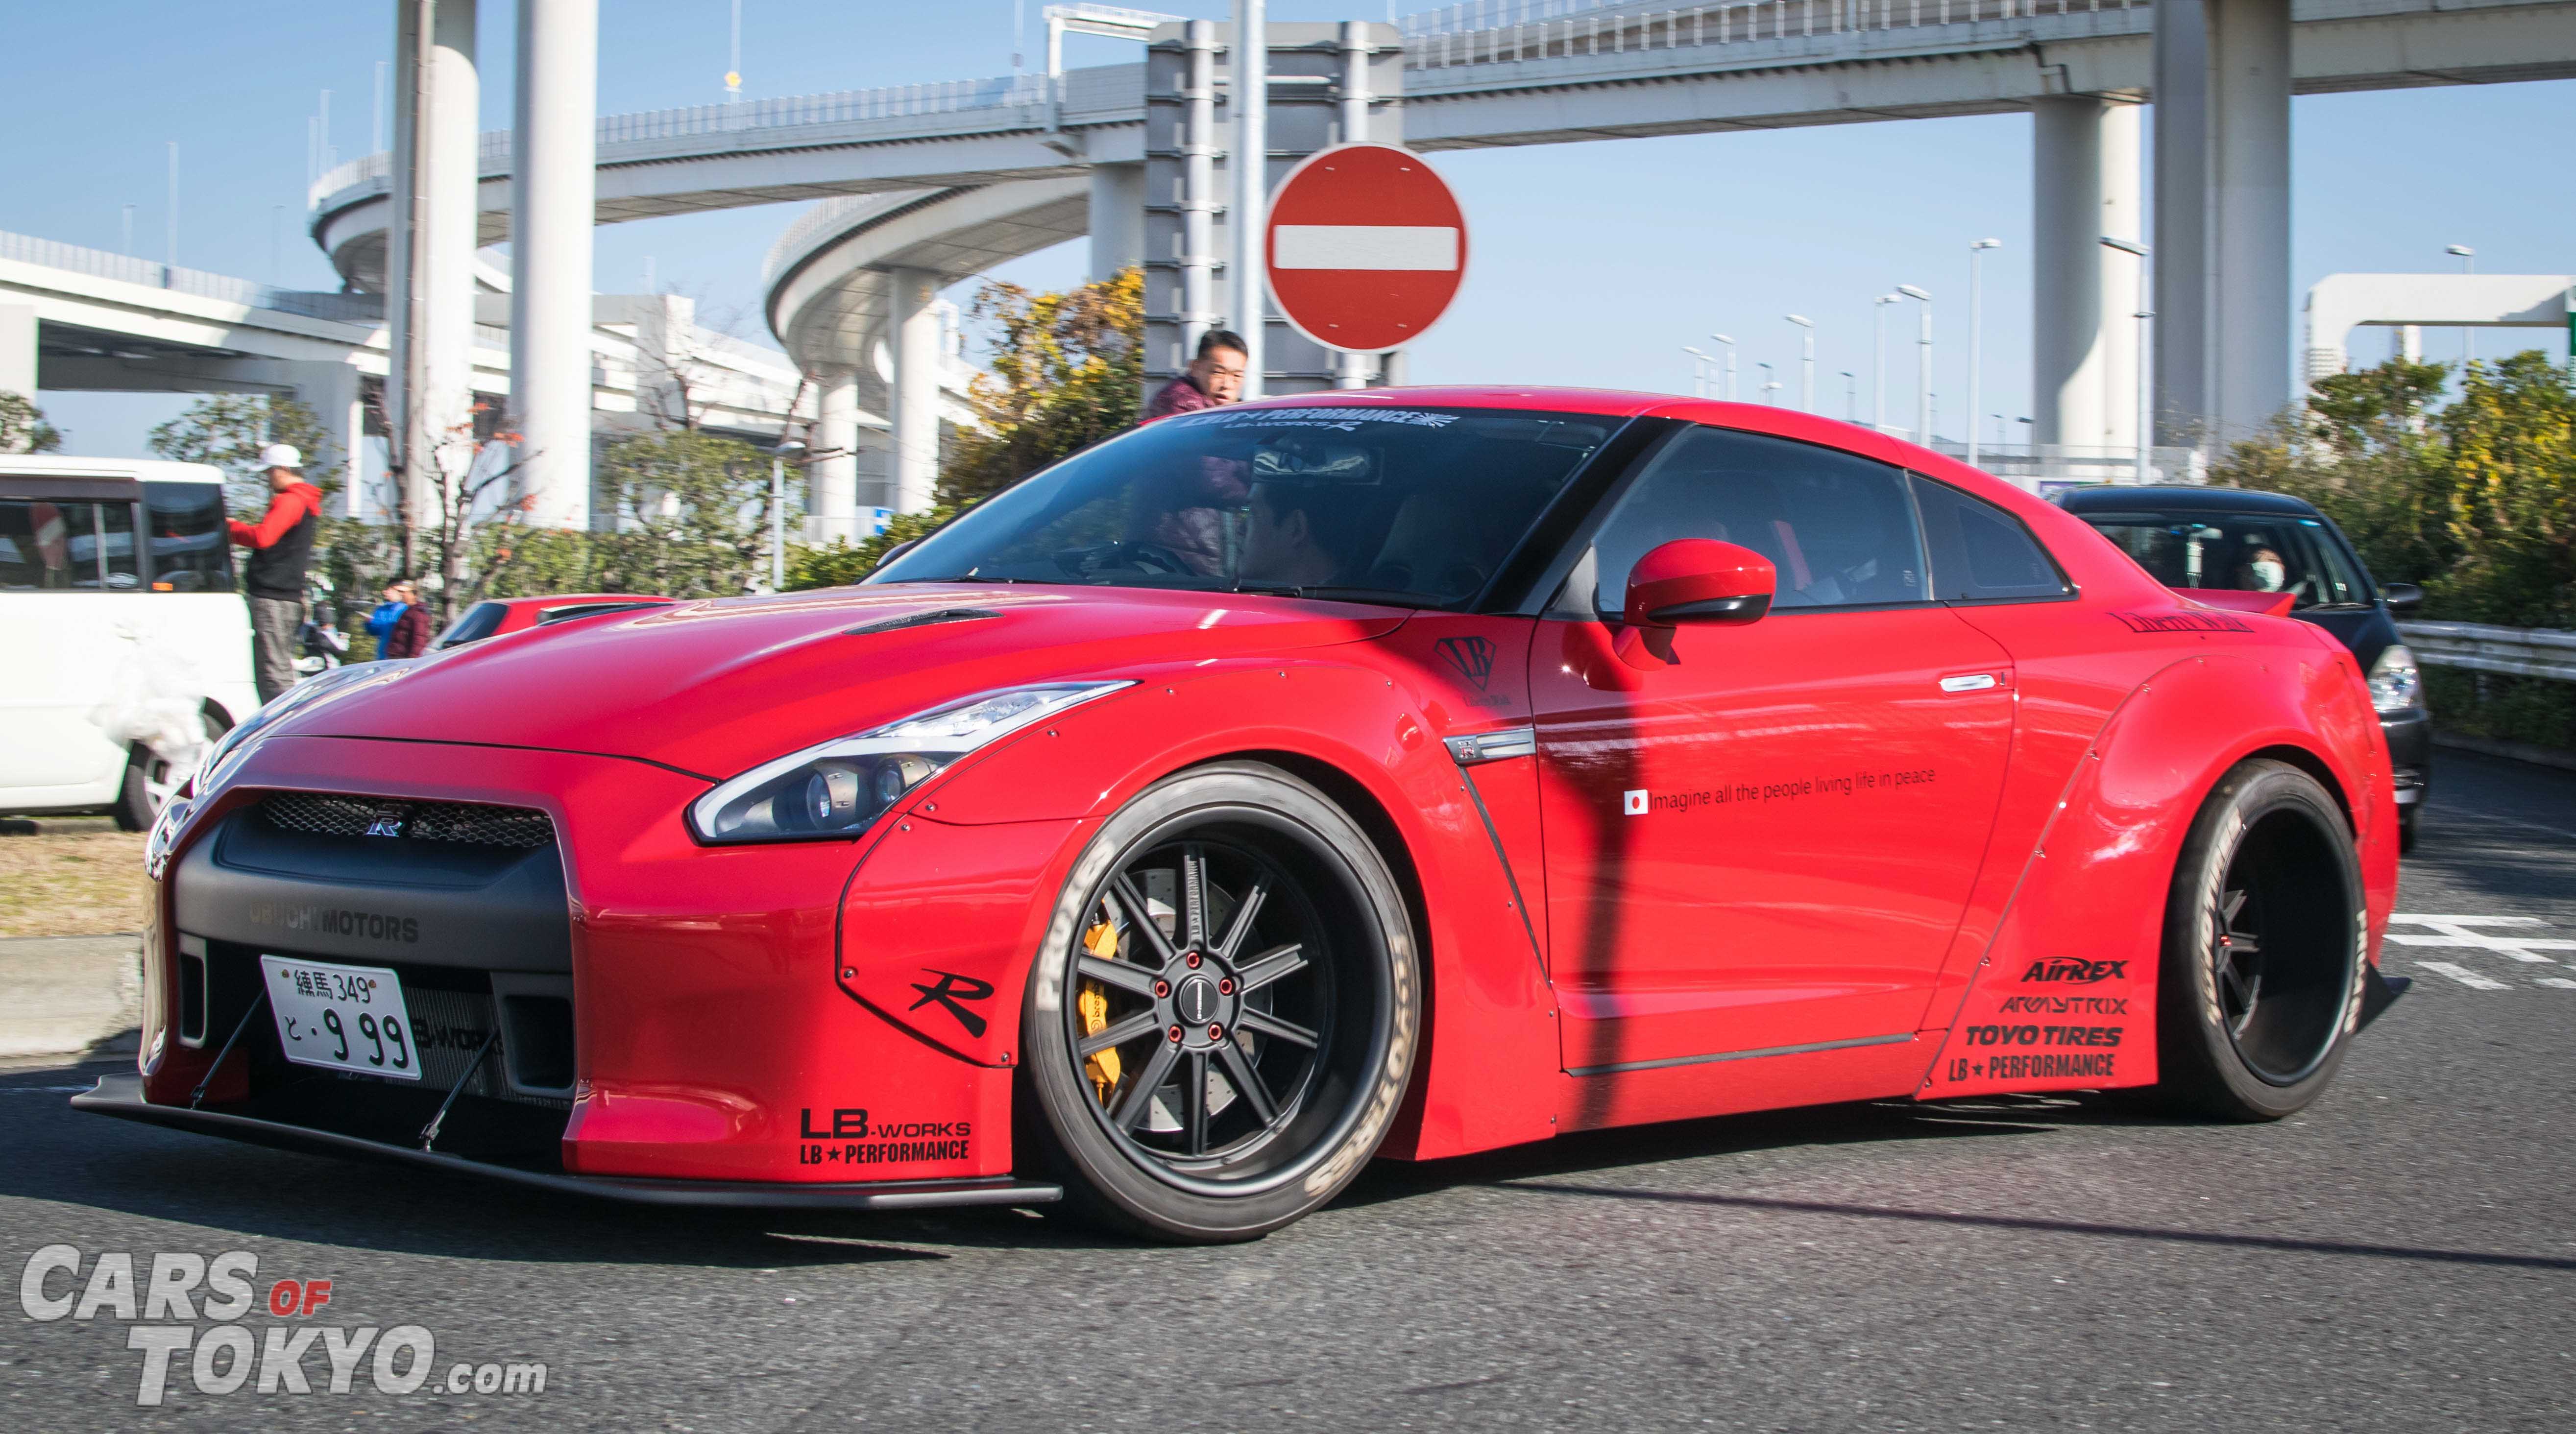 Cars of Tokyo Liberty Walk Nissan GT-R Red